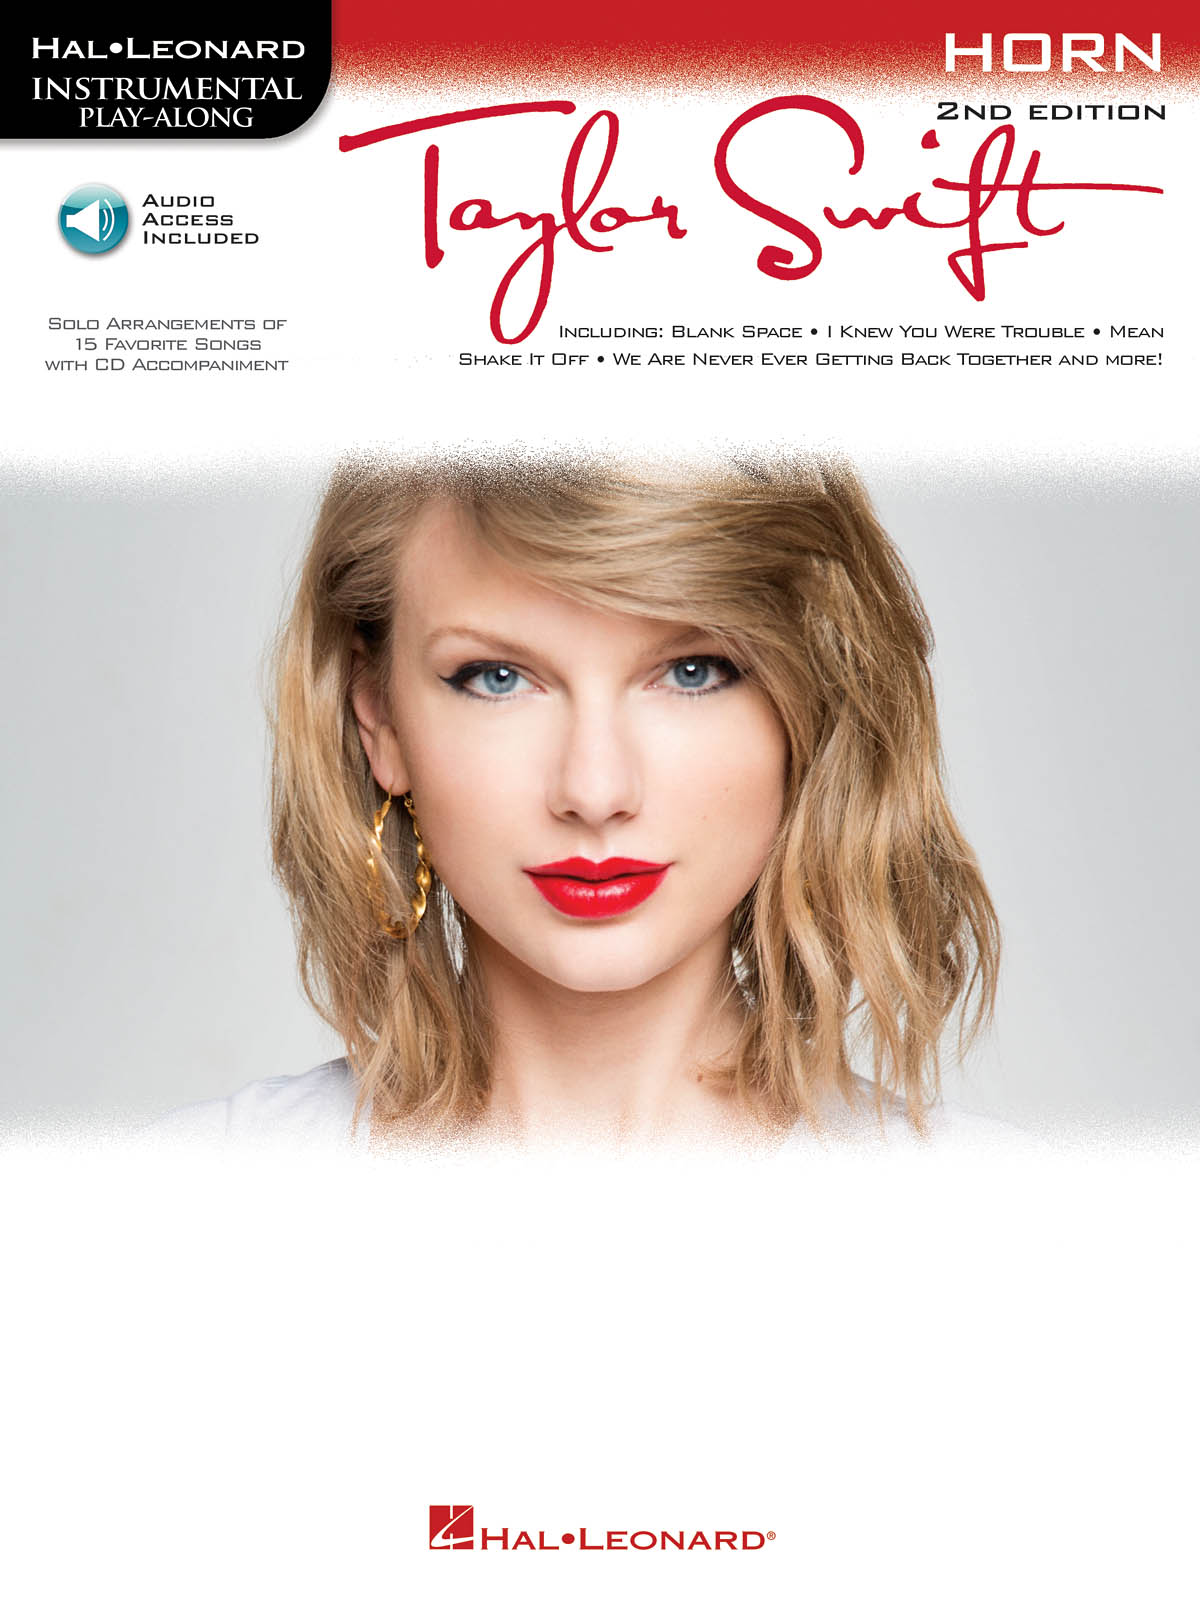 Instrumental Play-Along for Horn Taylor Swift